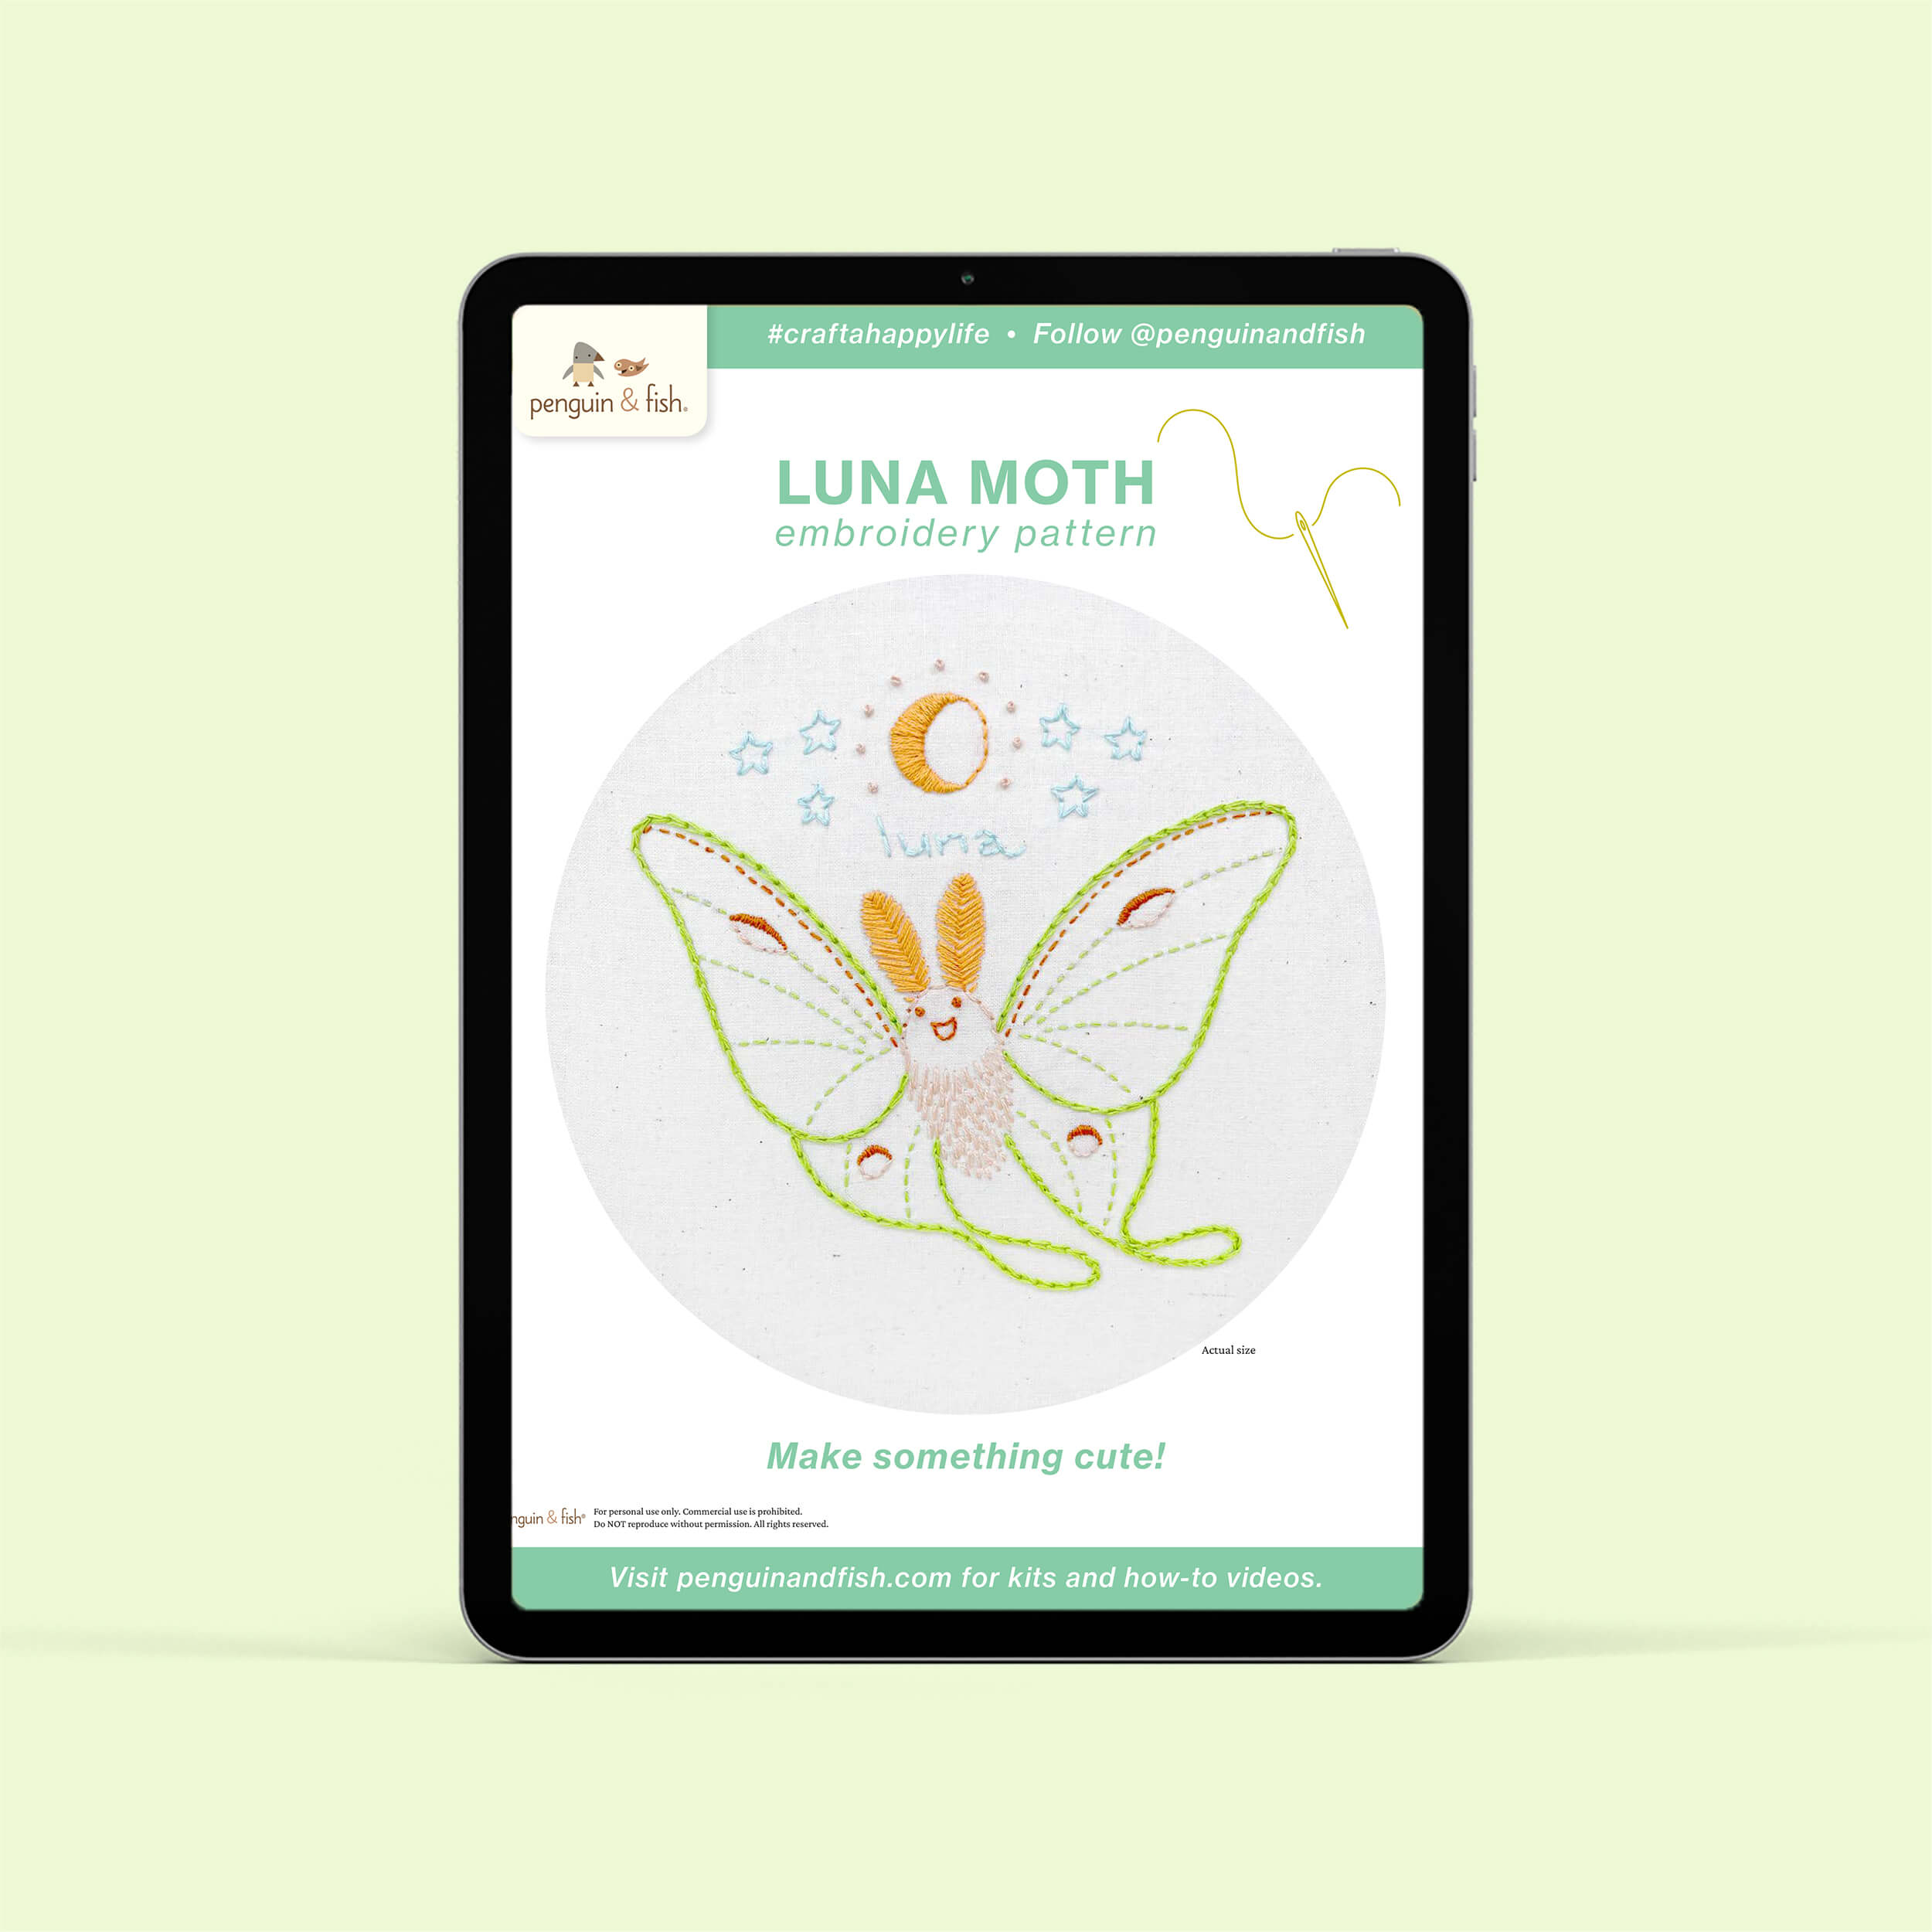 Luna Moth PDF embroidery pattern shown on a tablet